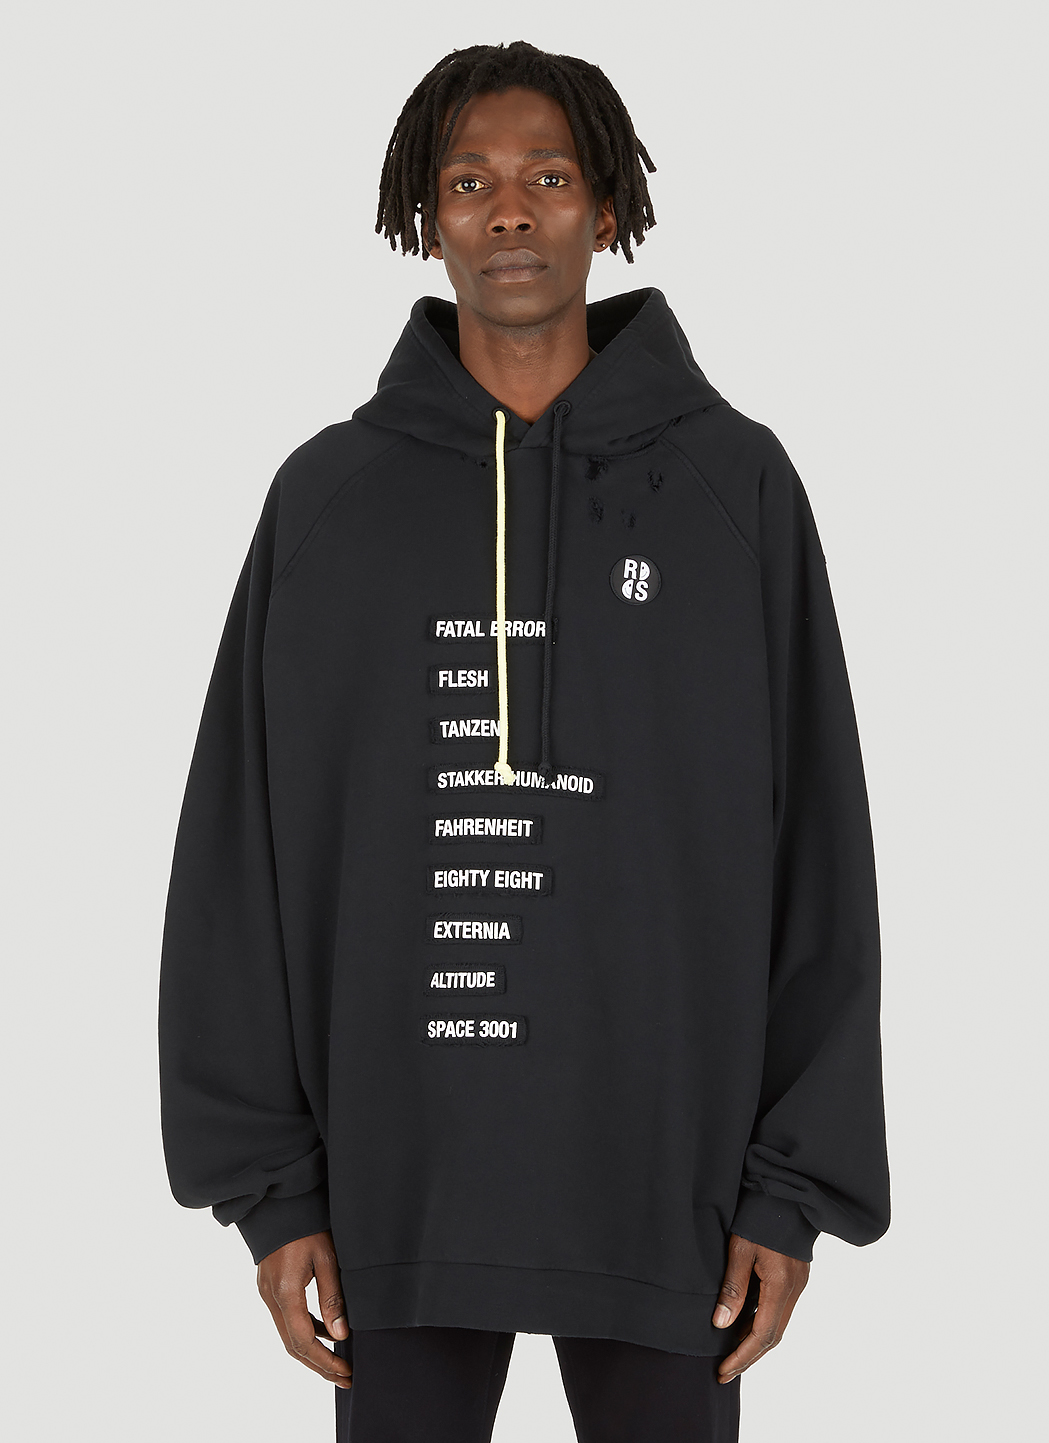 Raf Simons x Smiley Men's Big Fit Patched Text Hooded Sweatshirt in Black